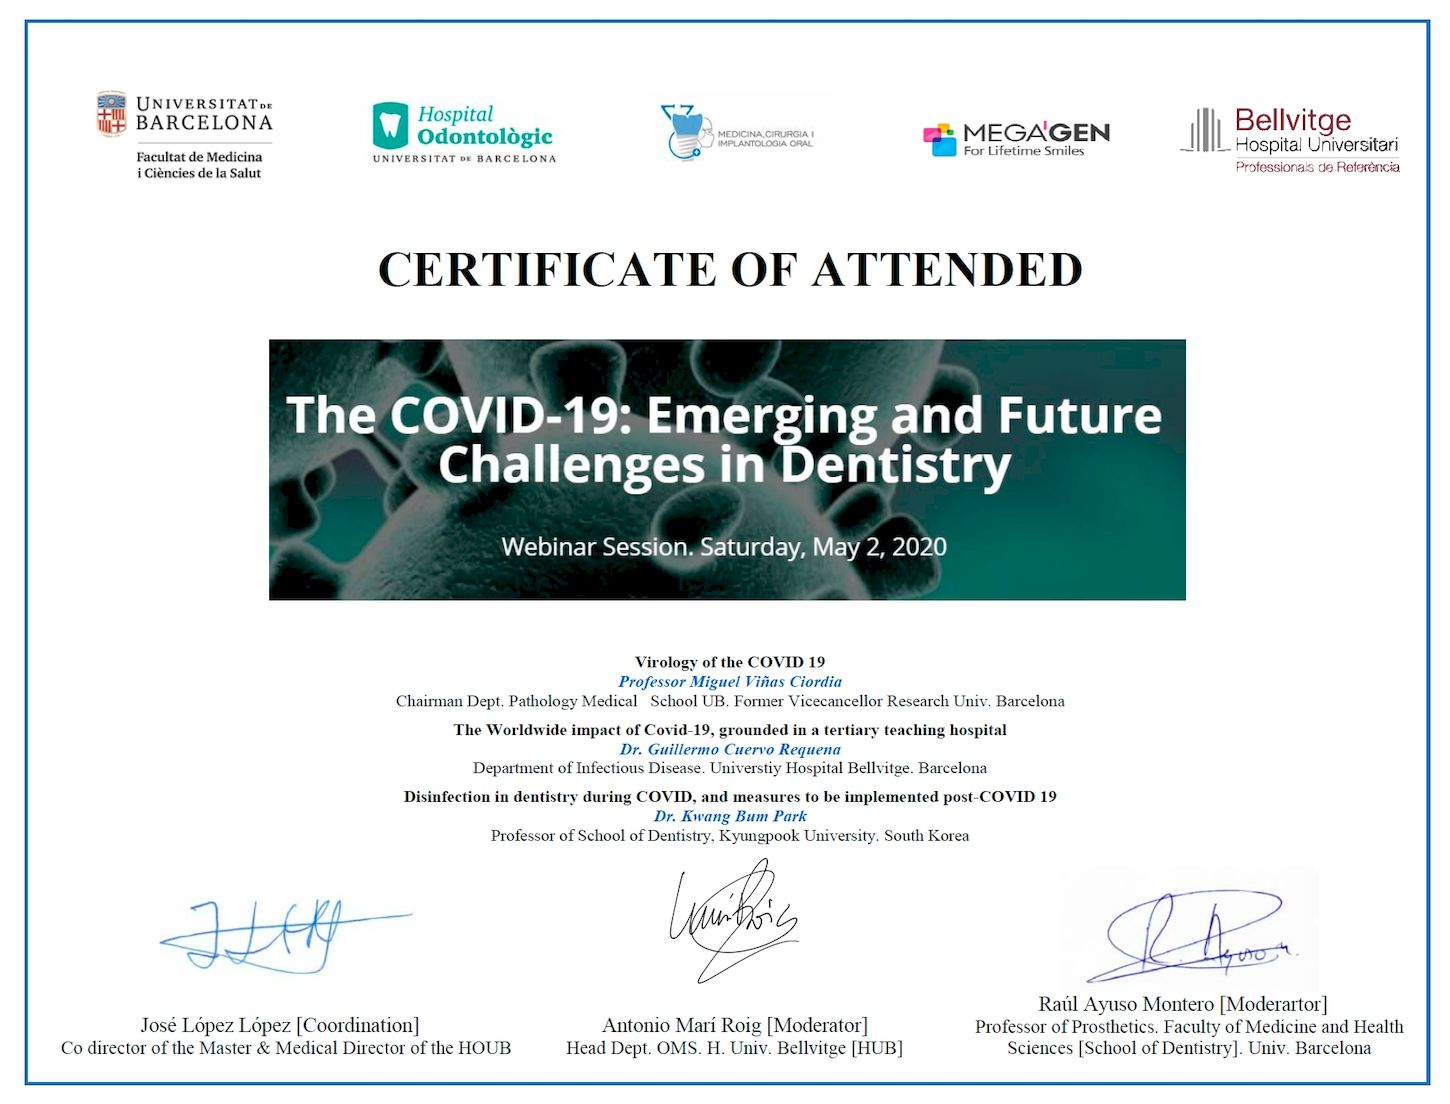 doctores romero The COVID-19: Emerging and Future Challenges in Dentistry Covid-19